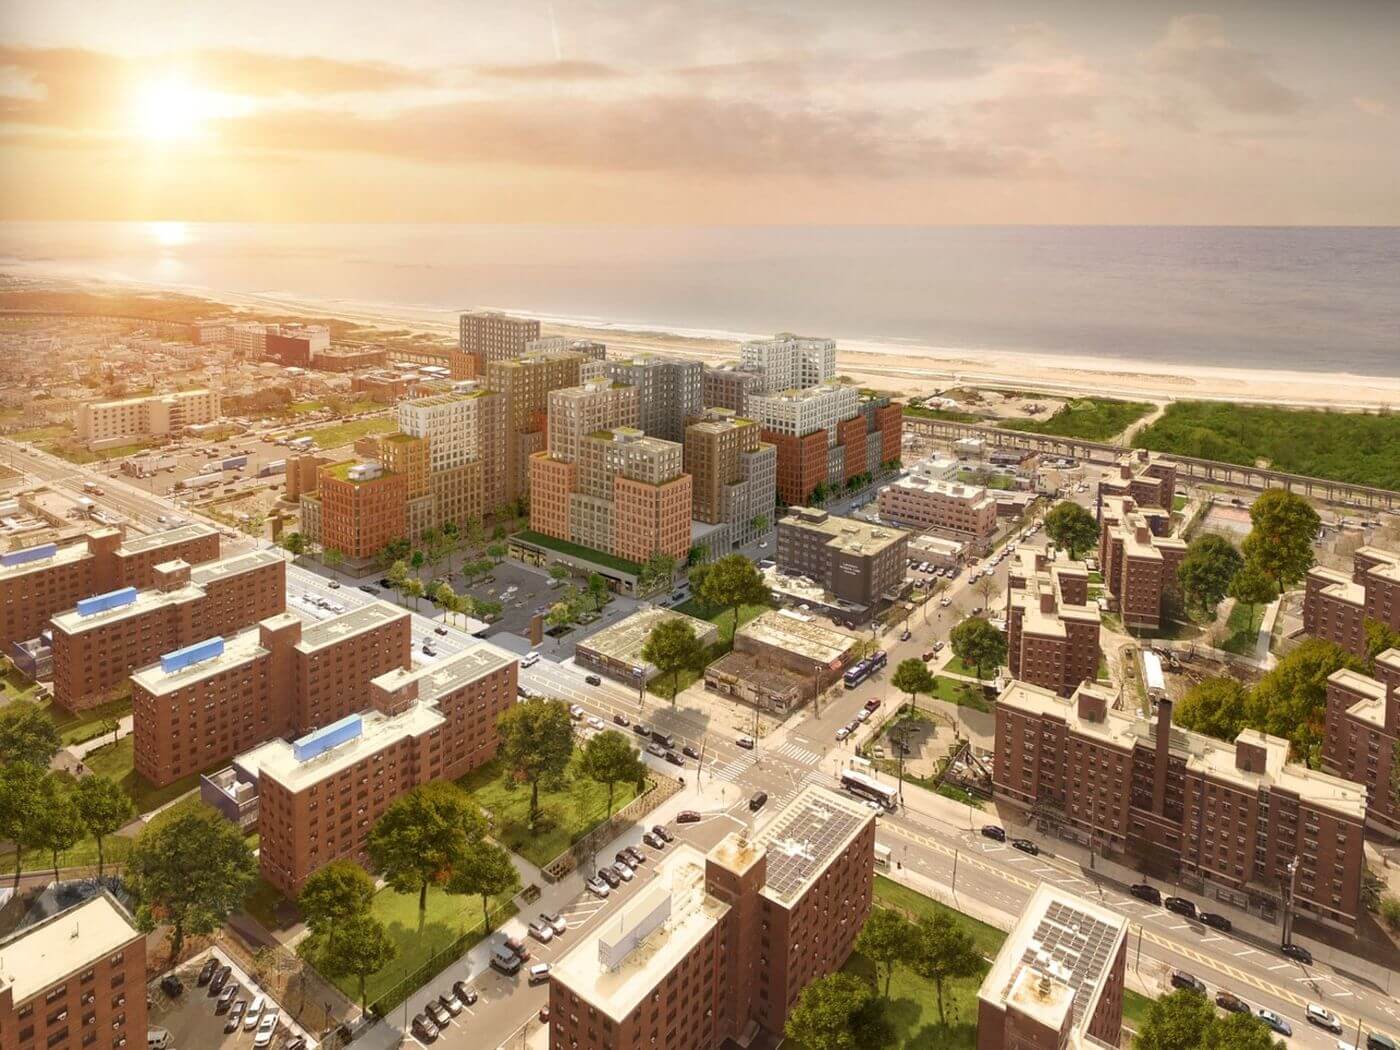 Aerial rendering of an affordable housing complex